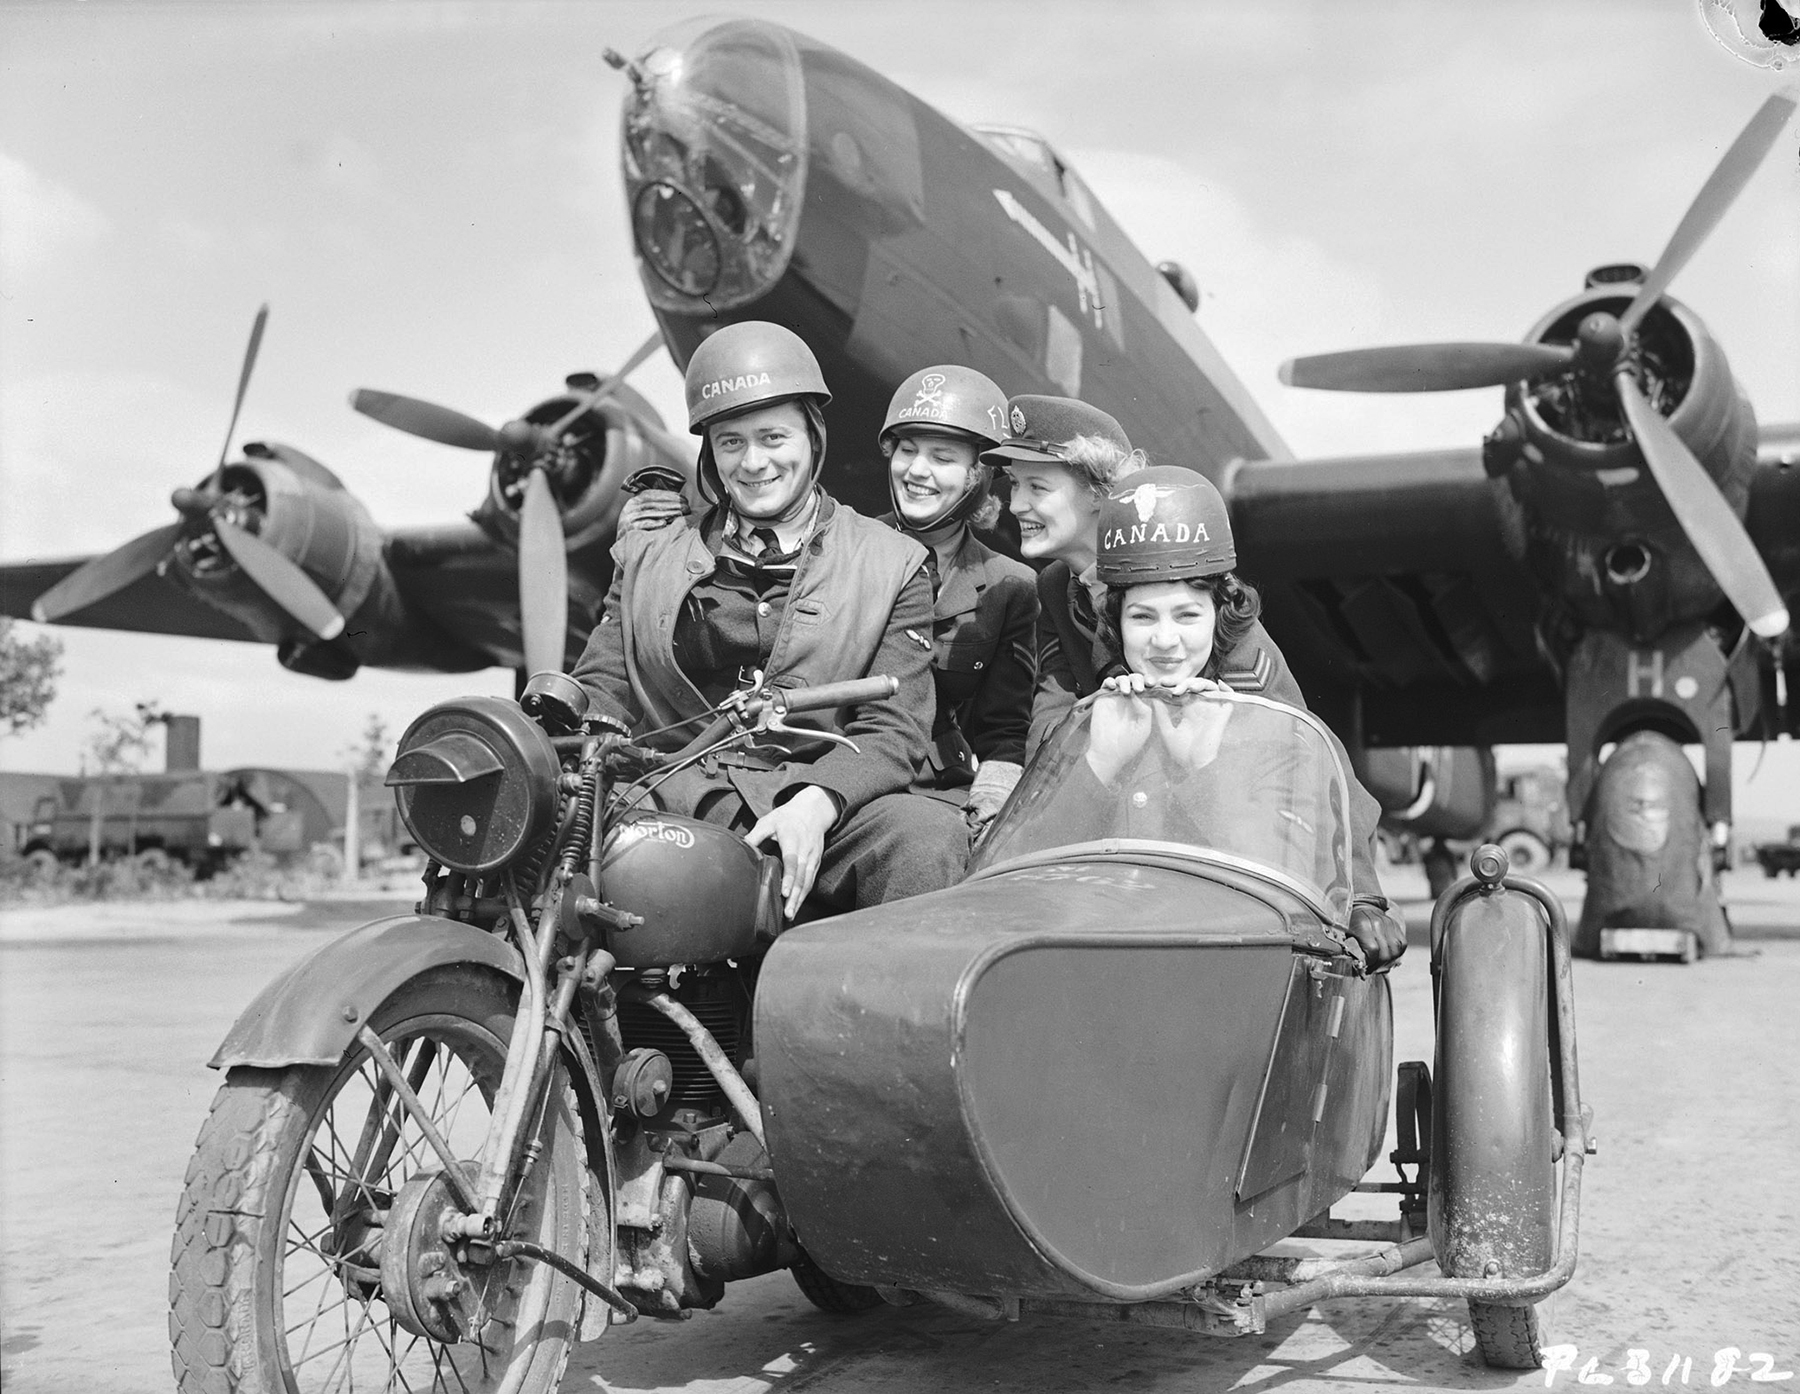 In a vintage black and white photo, four people in military uniforms are seated on a motorcycle or in its sidecar in front of a large aircraft.